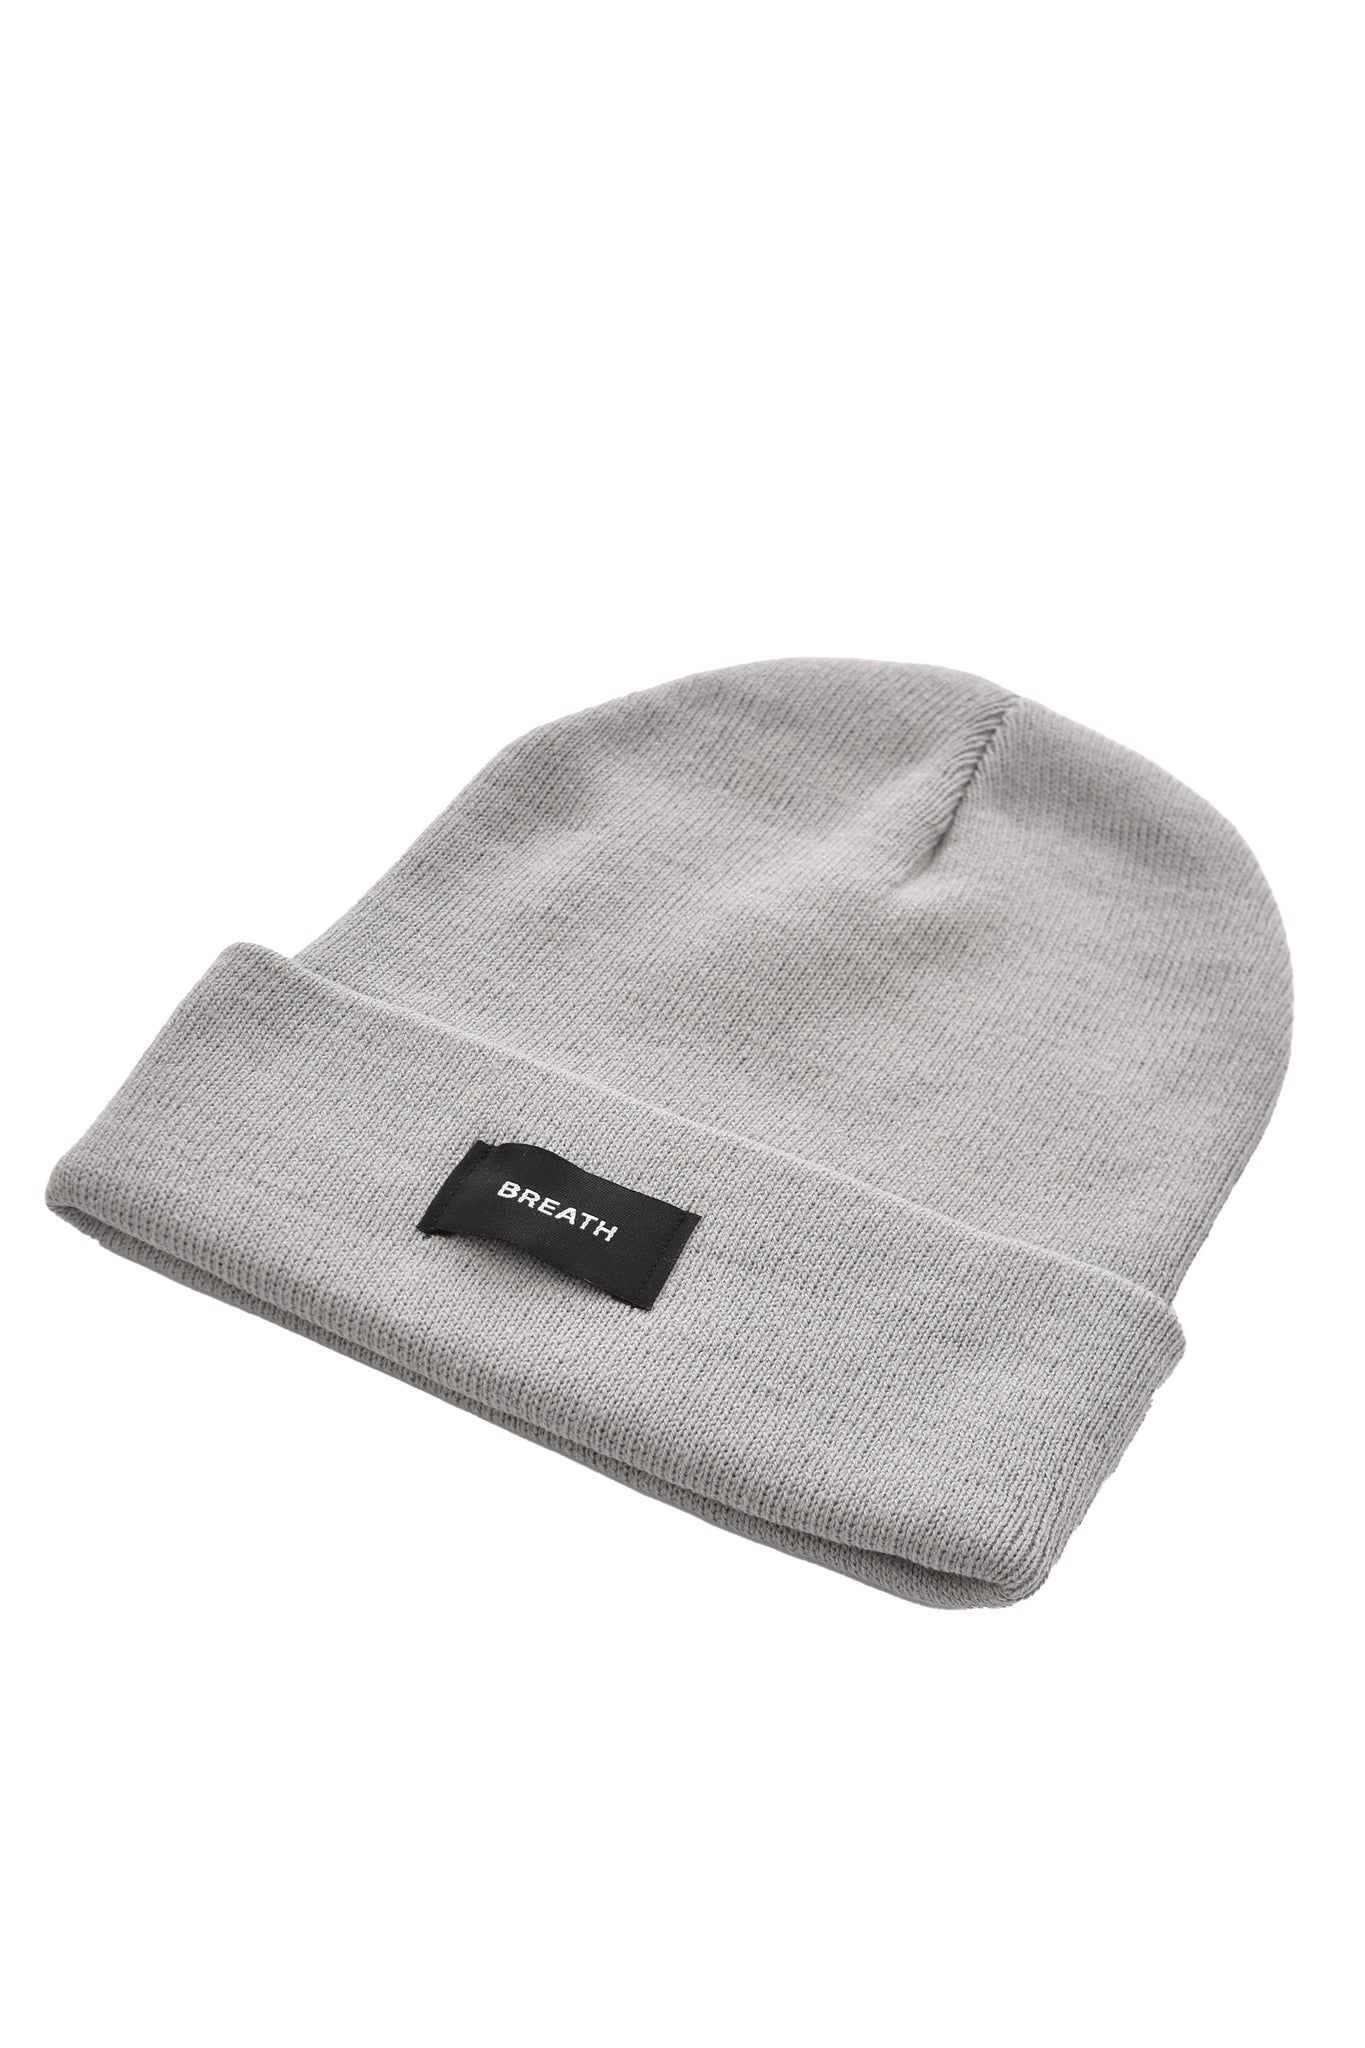 EMBROIDERY KNIT CAP / GREY